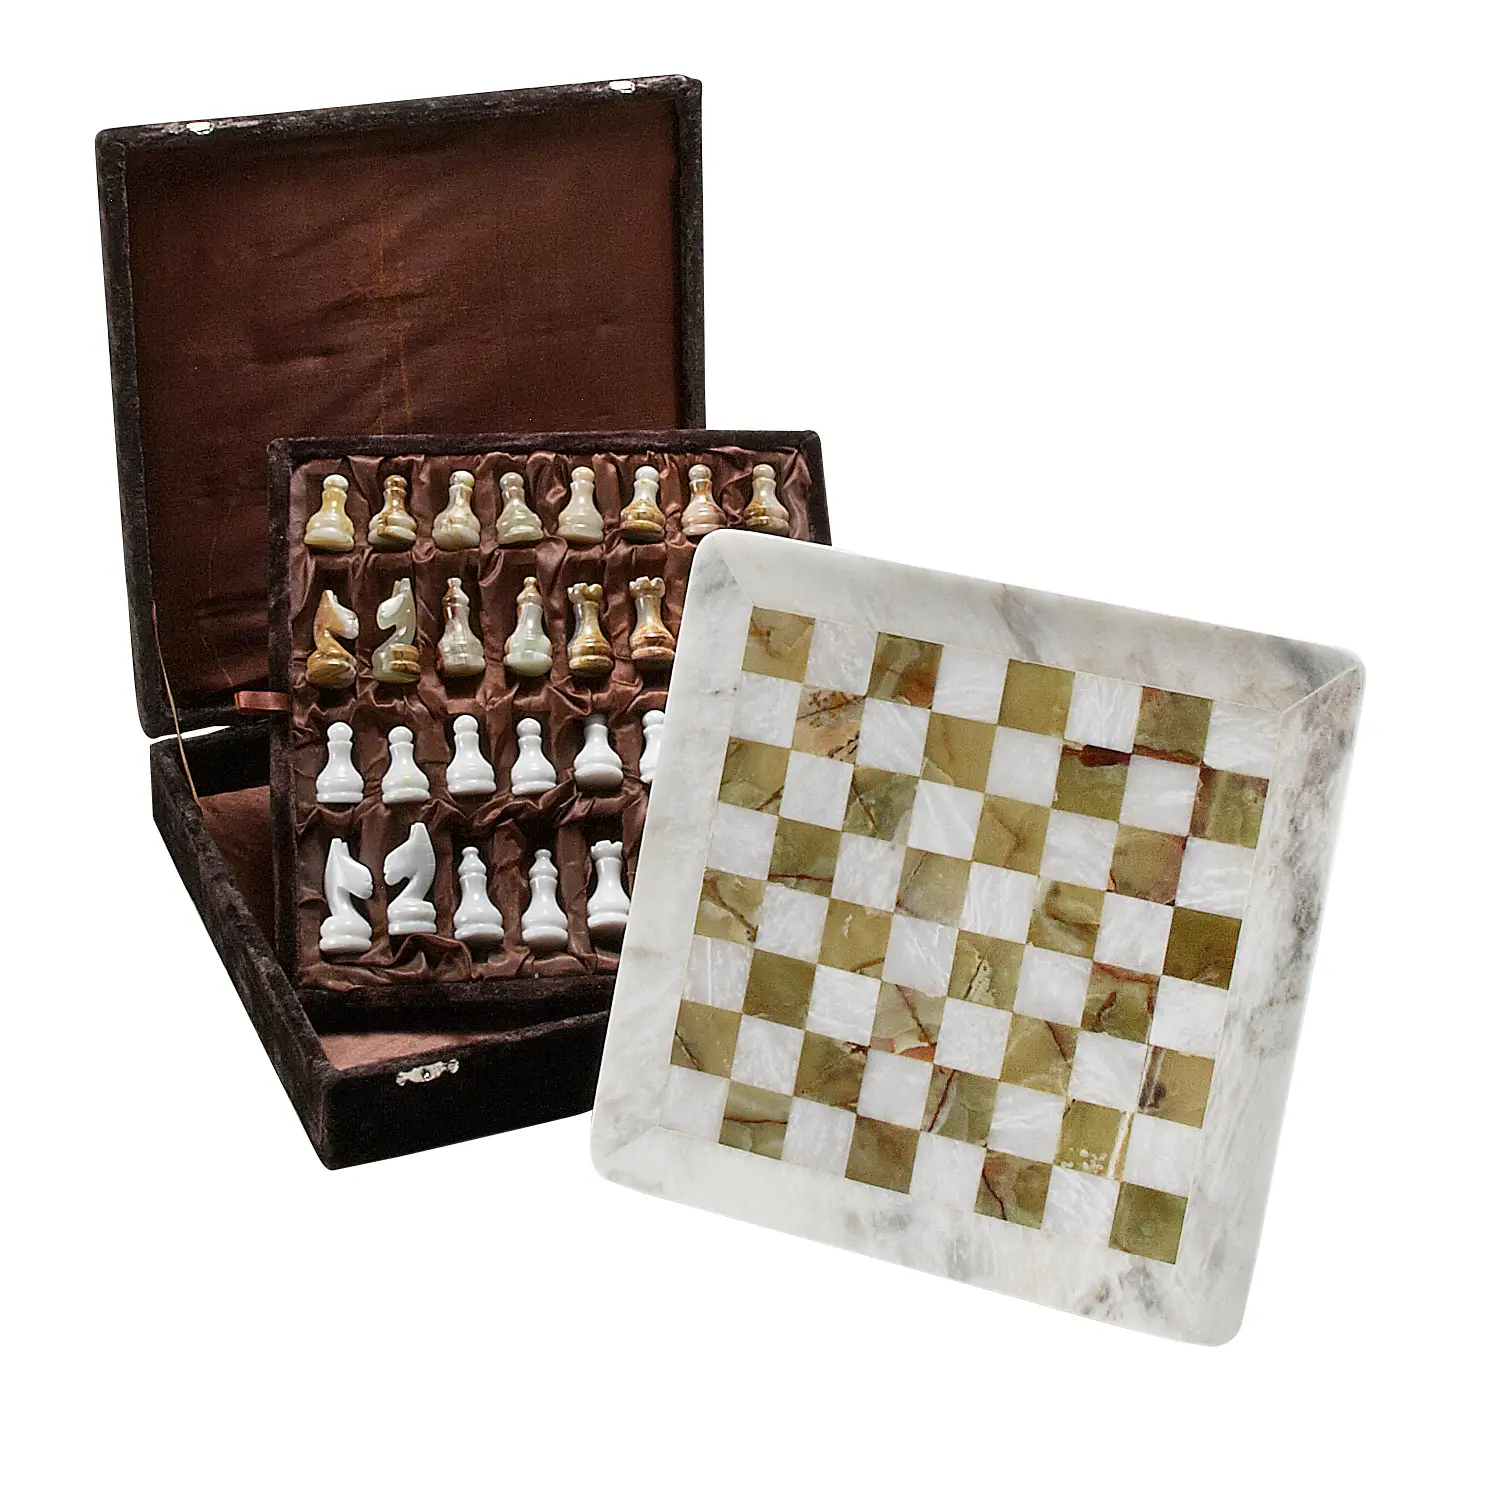 11 Unique Gift Ideas for Chess Enthusiasts - Interesting Engineering